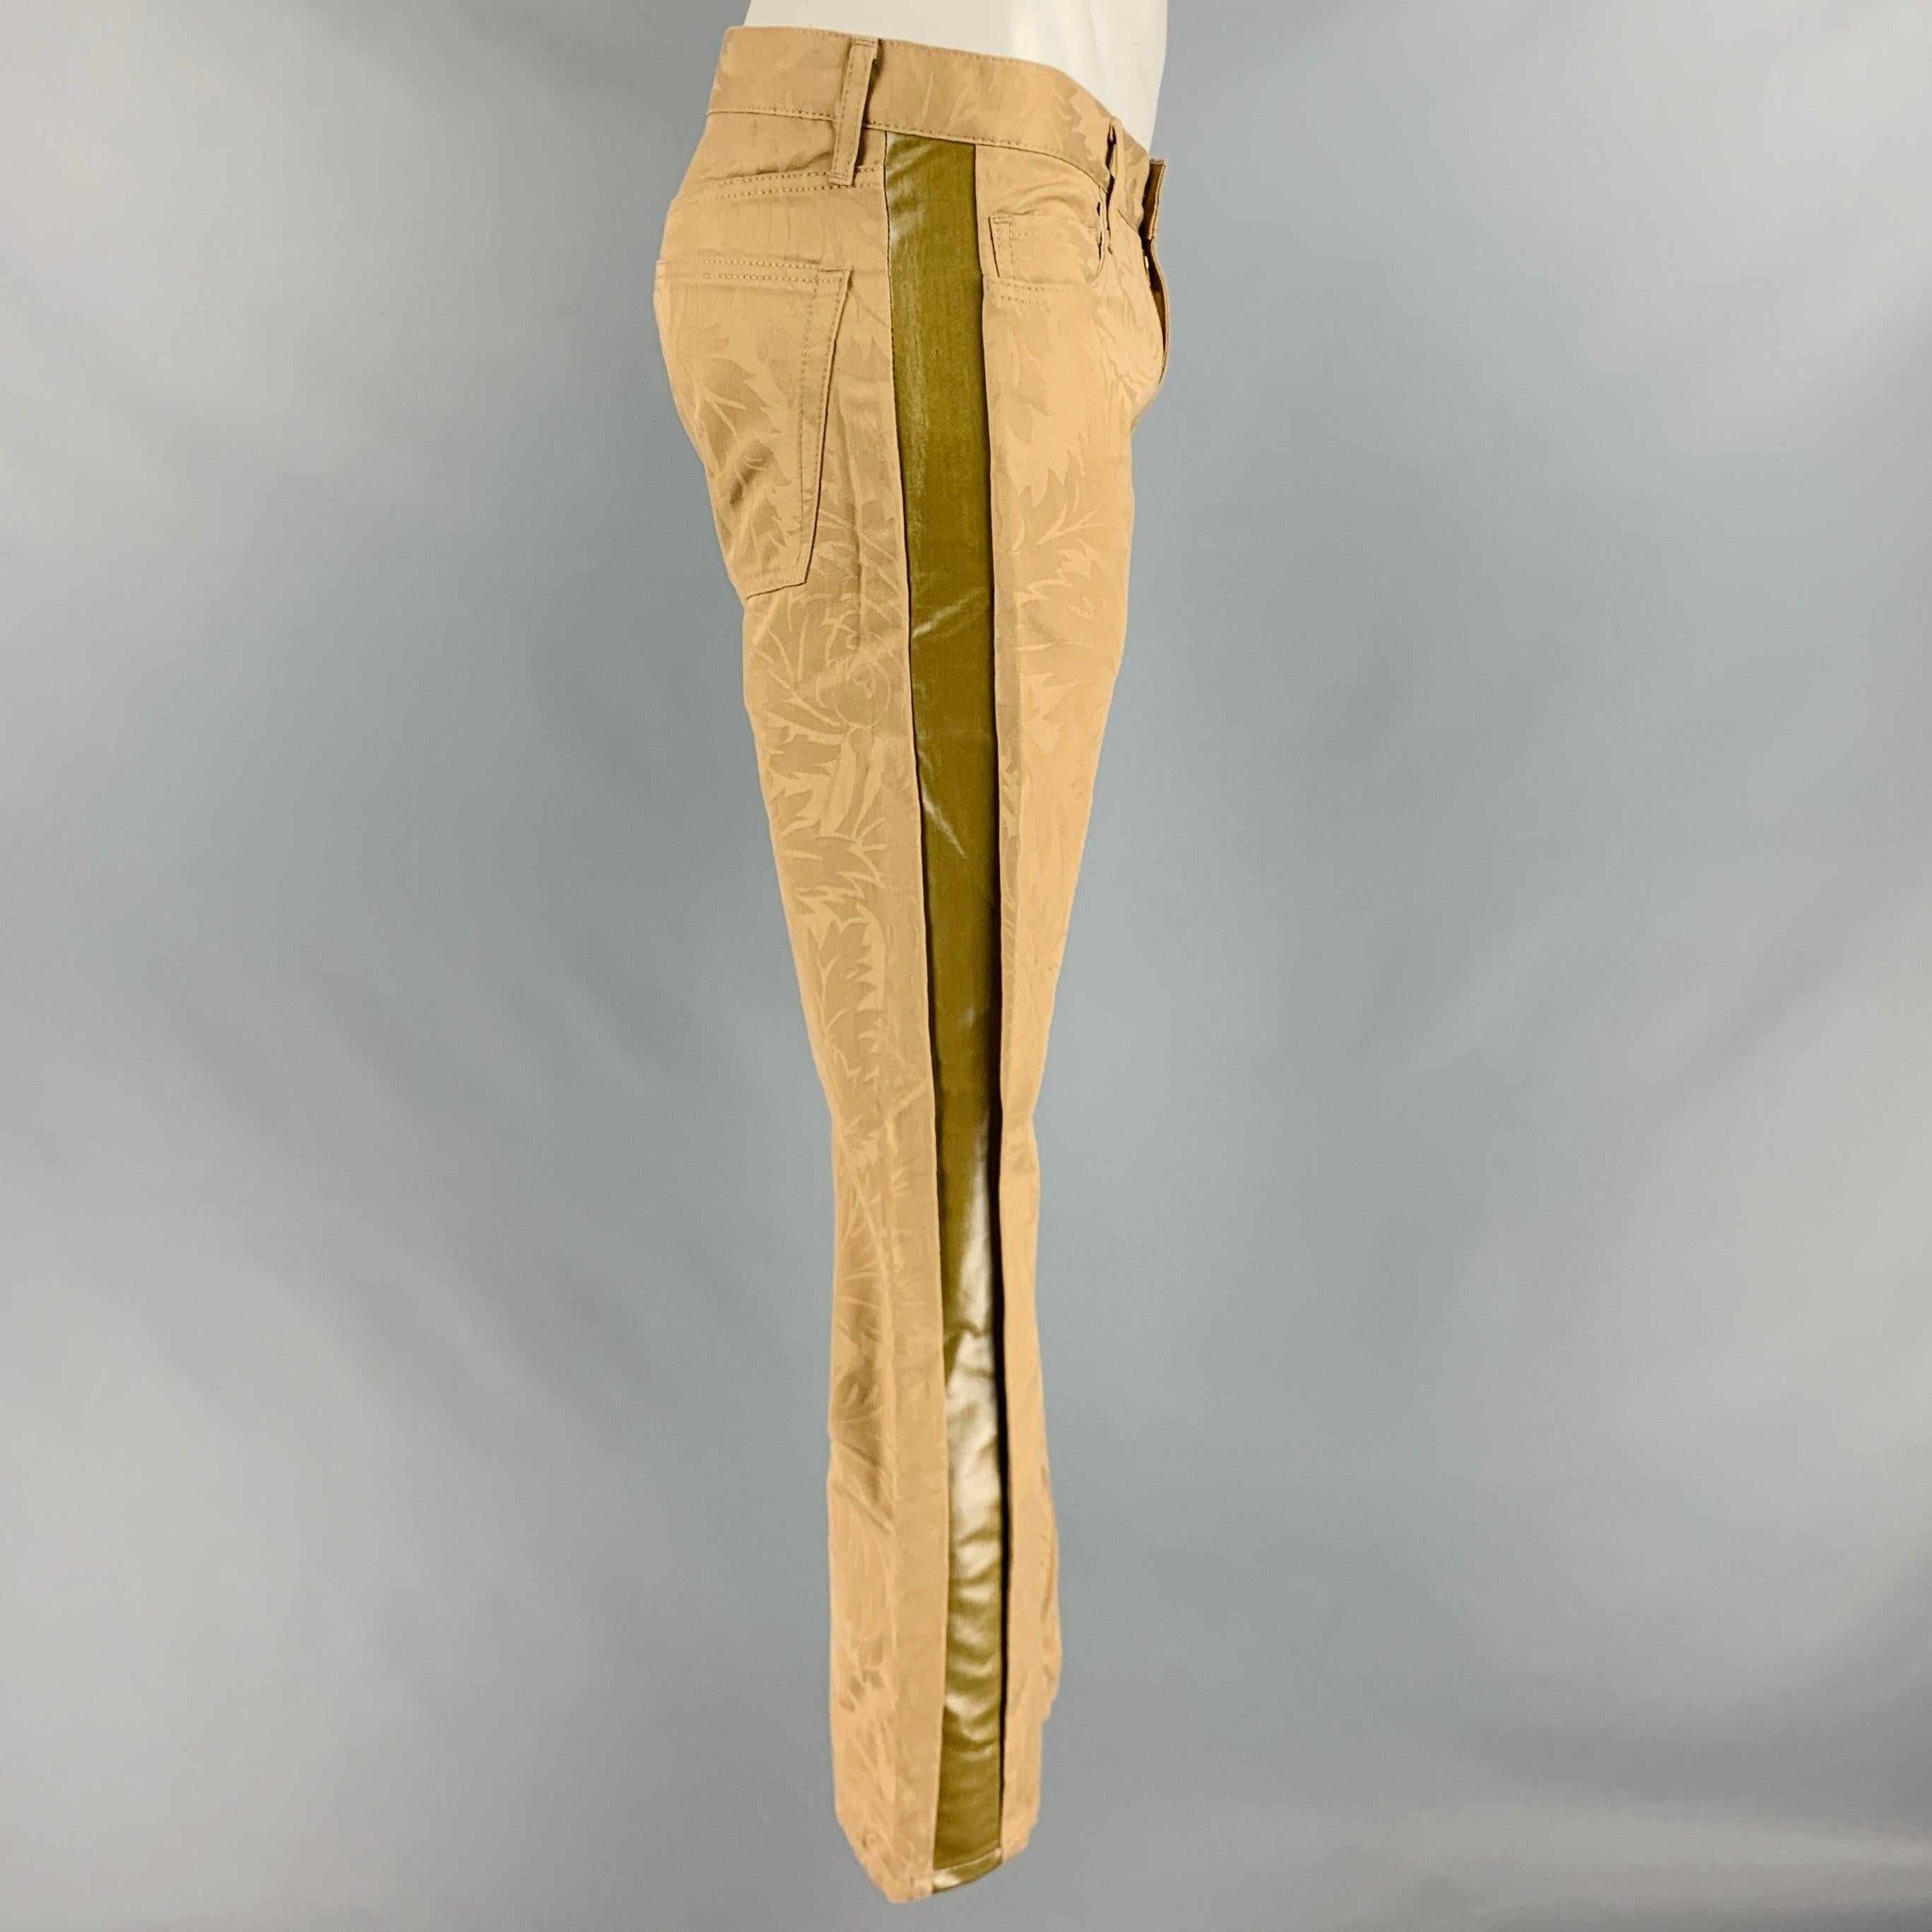 JUNYA WATANABE casual pants
in a beige cotton fabric featuring a low rise style, damask pattern, side stripes, and zip fly closure. Made in Japan.New With Tags. 

Marked:   L 

Measurements: 
  Waist: 35 inches Rise: 7.5 inches Inseam: 30 inches Leg